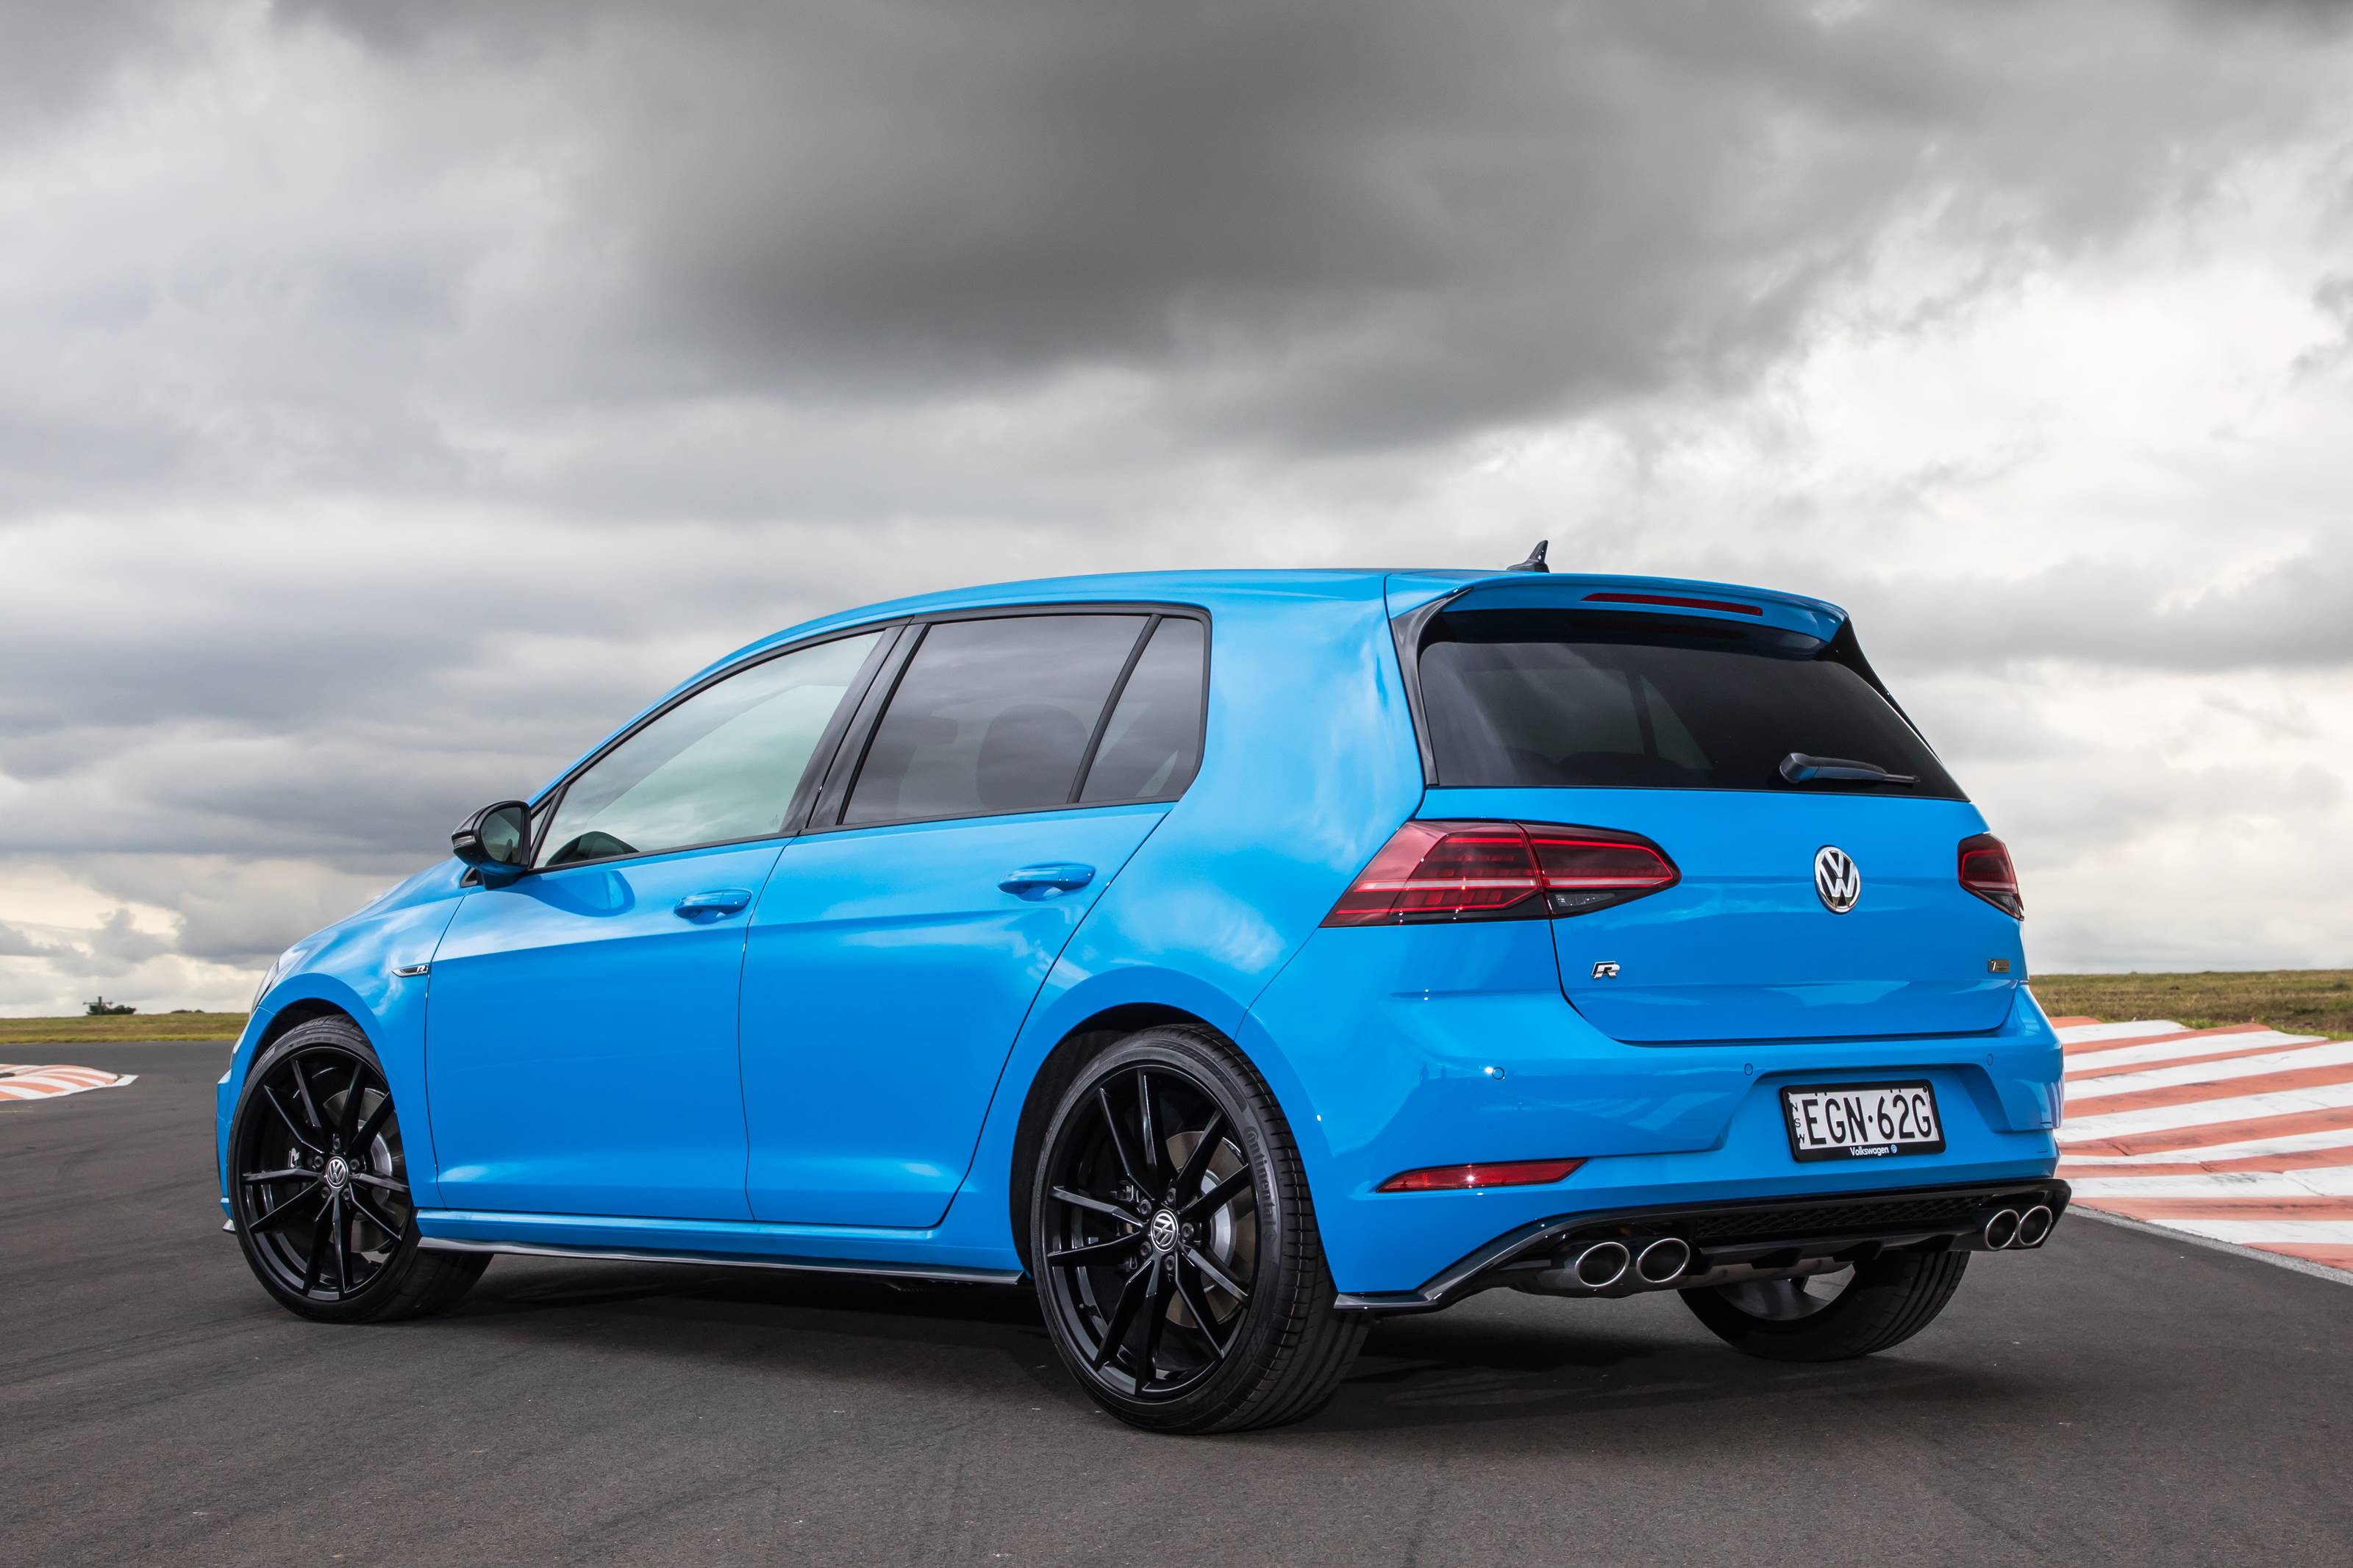 2020 Volkswagen Golf R Final Edition, available in factory hand painted custom colours: Victory Blue; Viper Green metallic (recalling the Scirocco R); and Violet Touch Pearlescent.